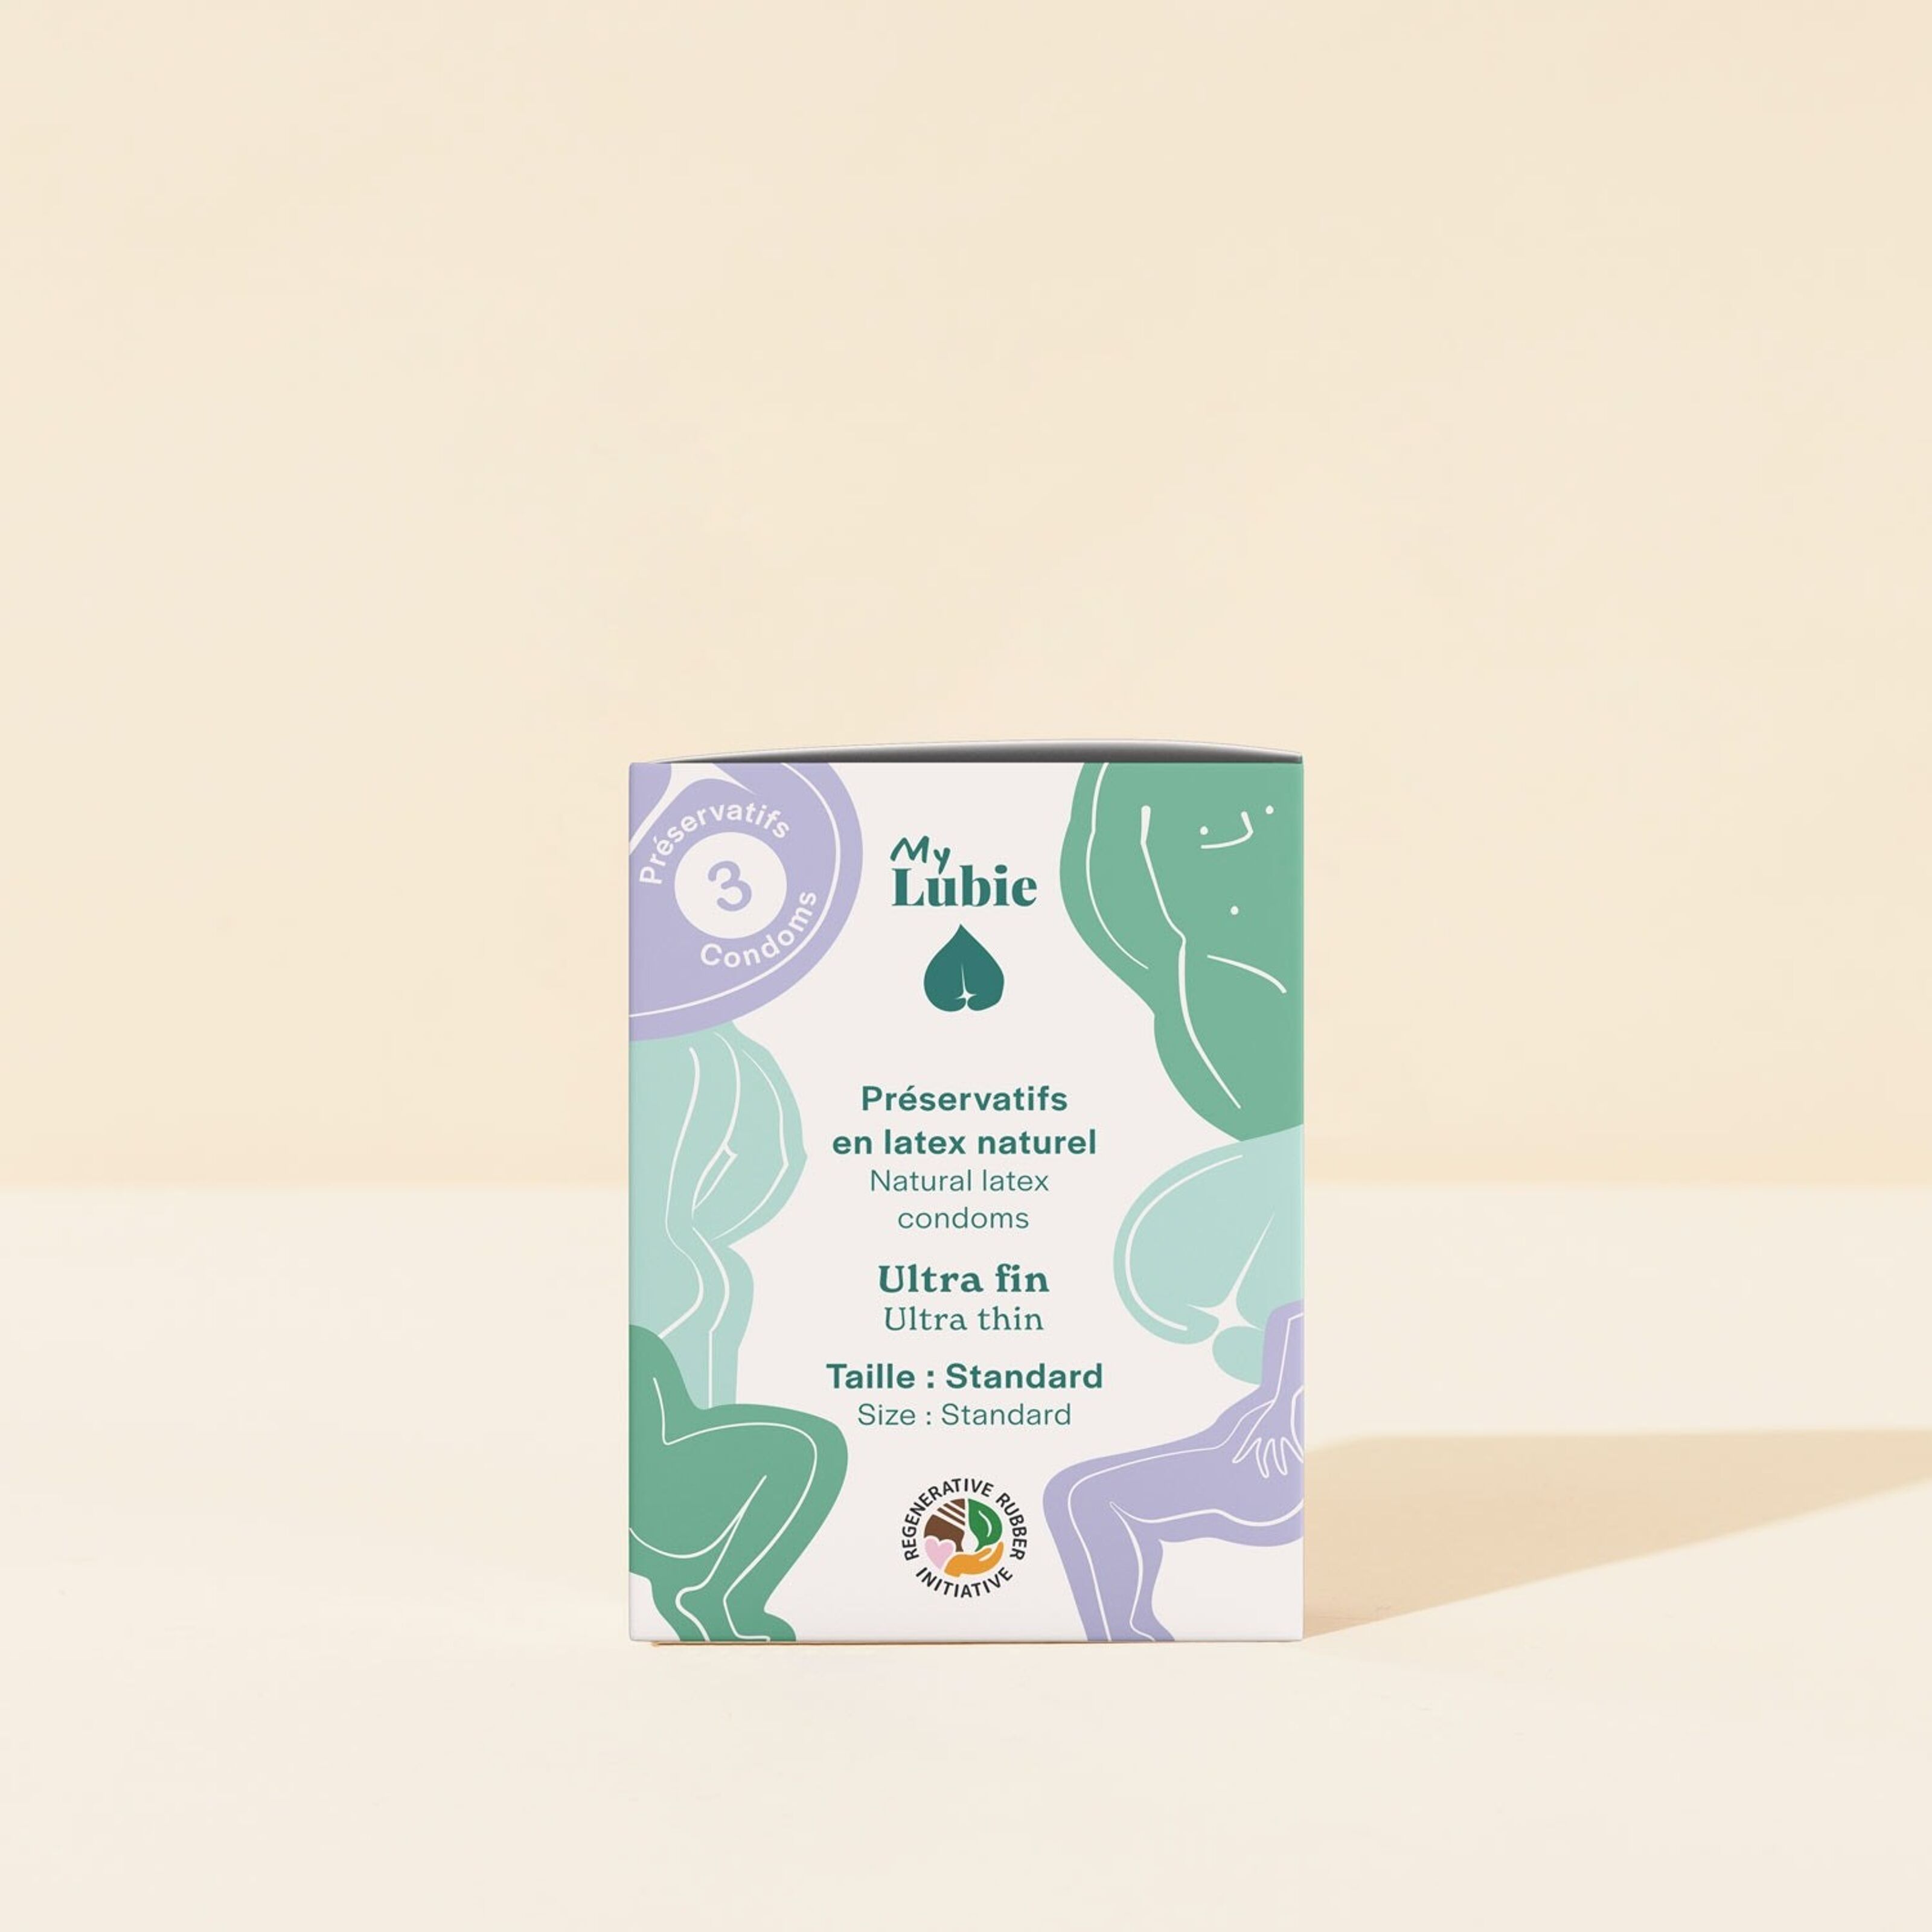 Biodegradable intimate wipes - My lubie